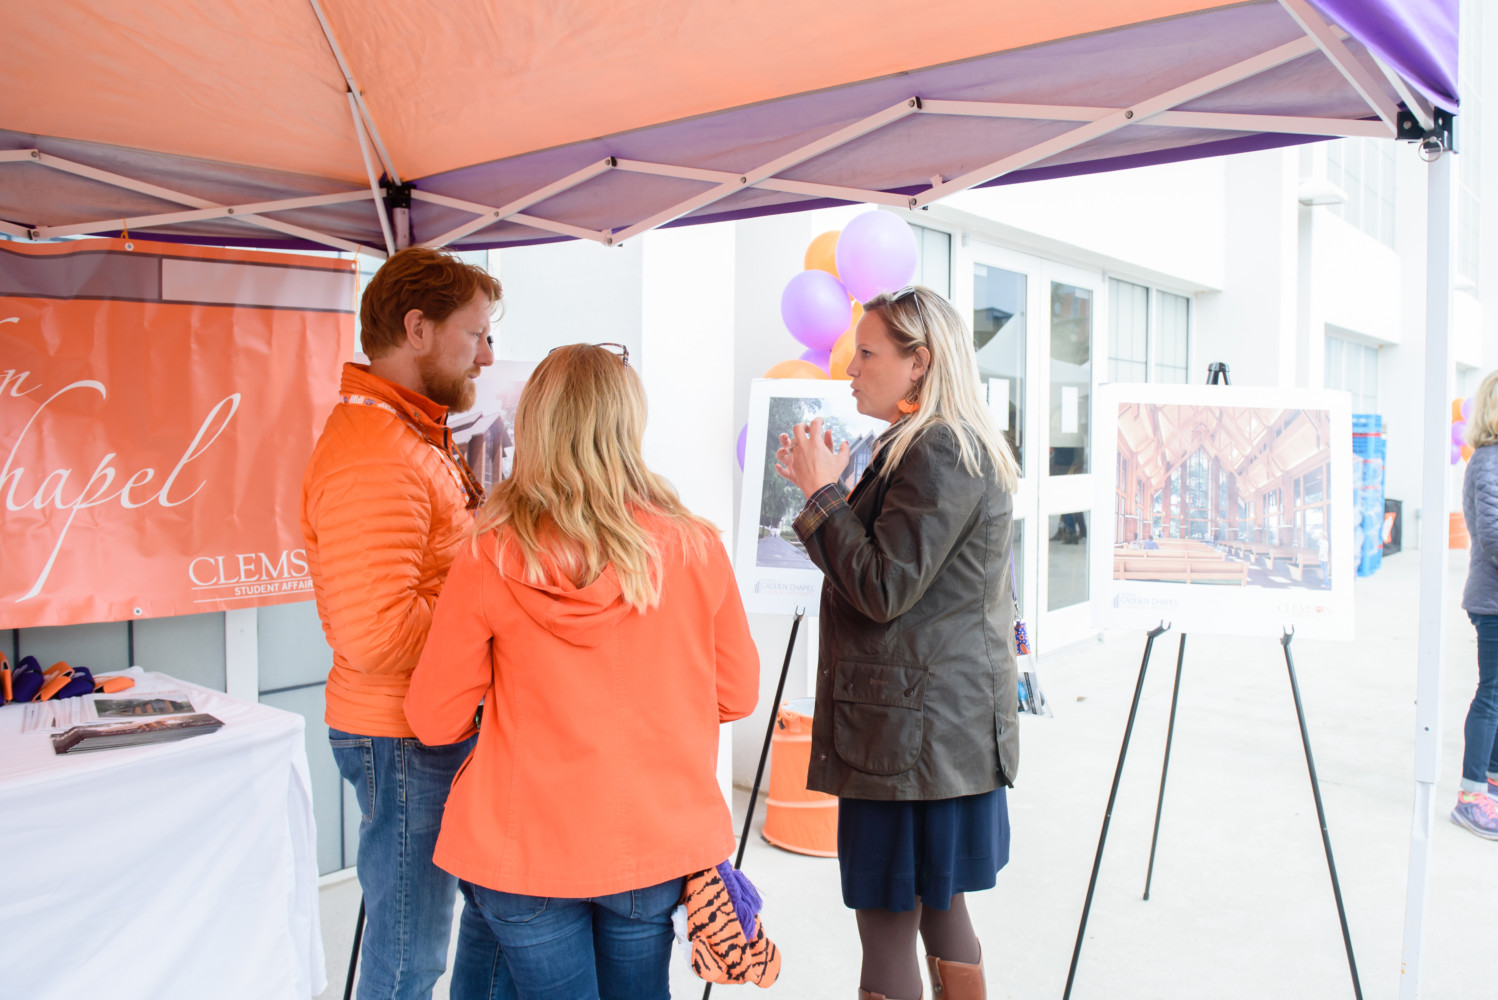 Brandy Page (right) discusses the Samuel J. Cadden Chapel with prospective donors at a 2018 tailgate prior to a Clemson football game.